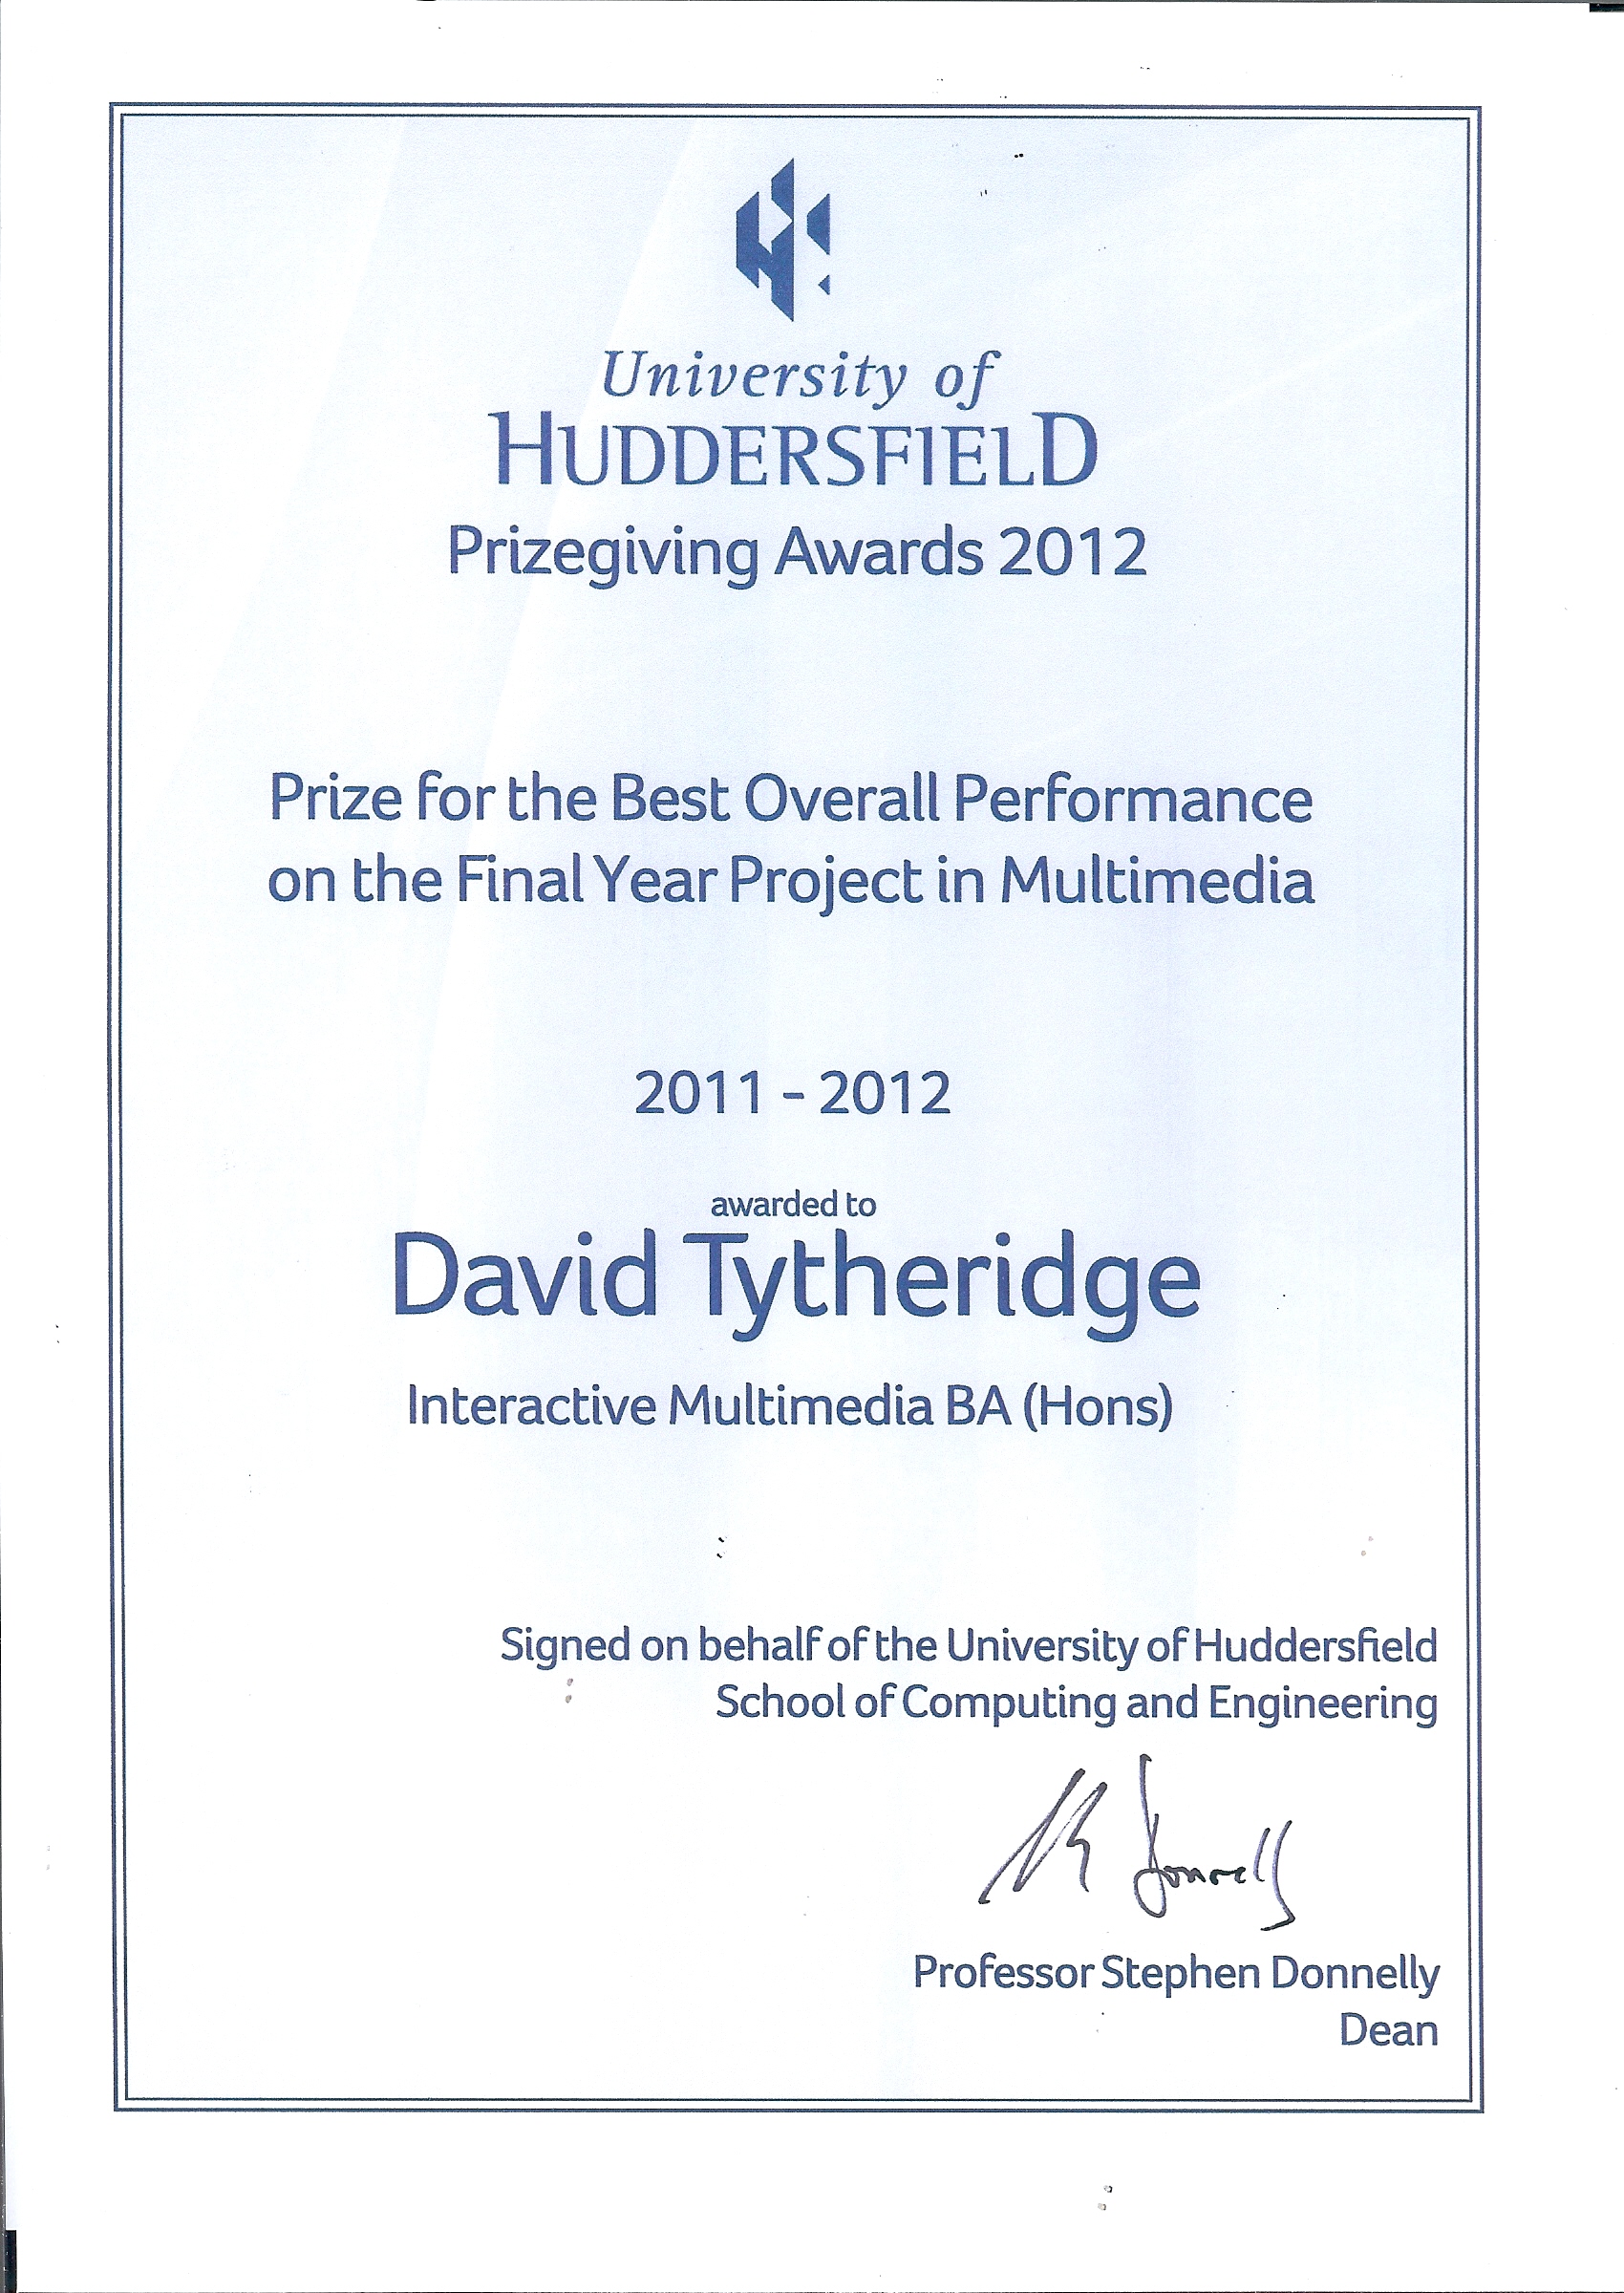 Best Overall Performance on the Final Year Project in Multimedia